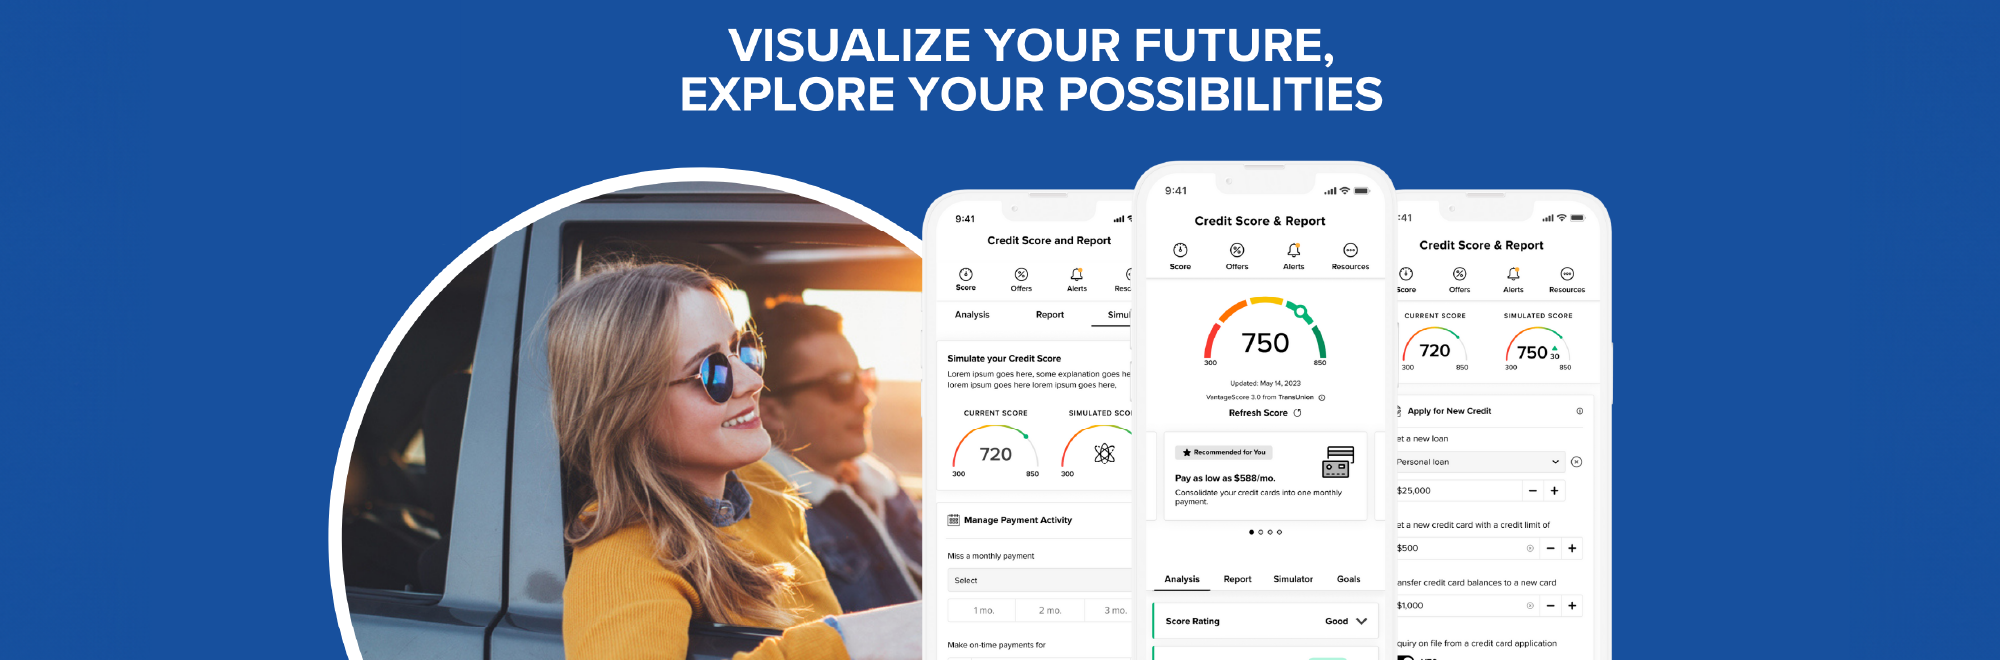 visualize your future, explore your possibilities with SavvyMoney